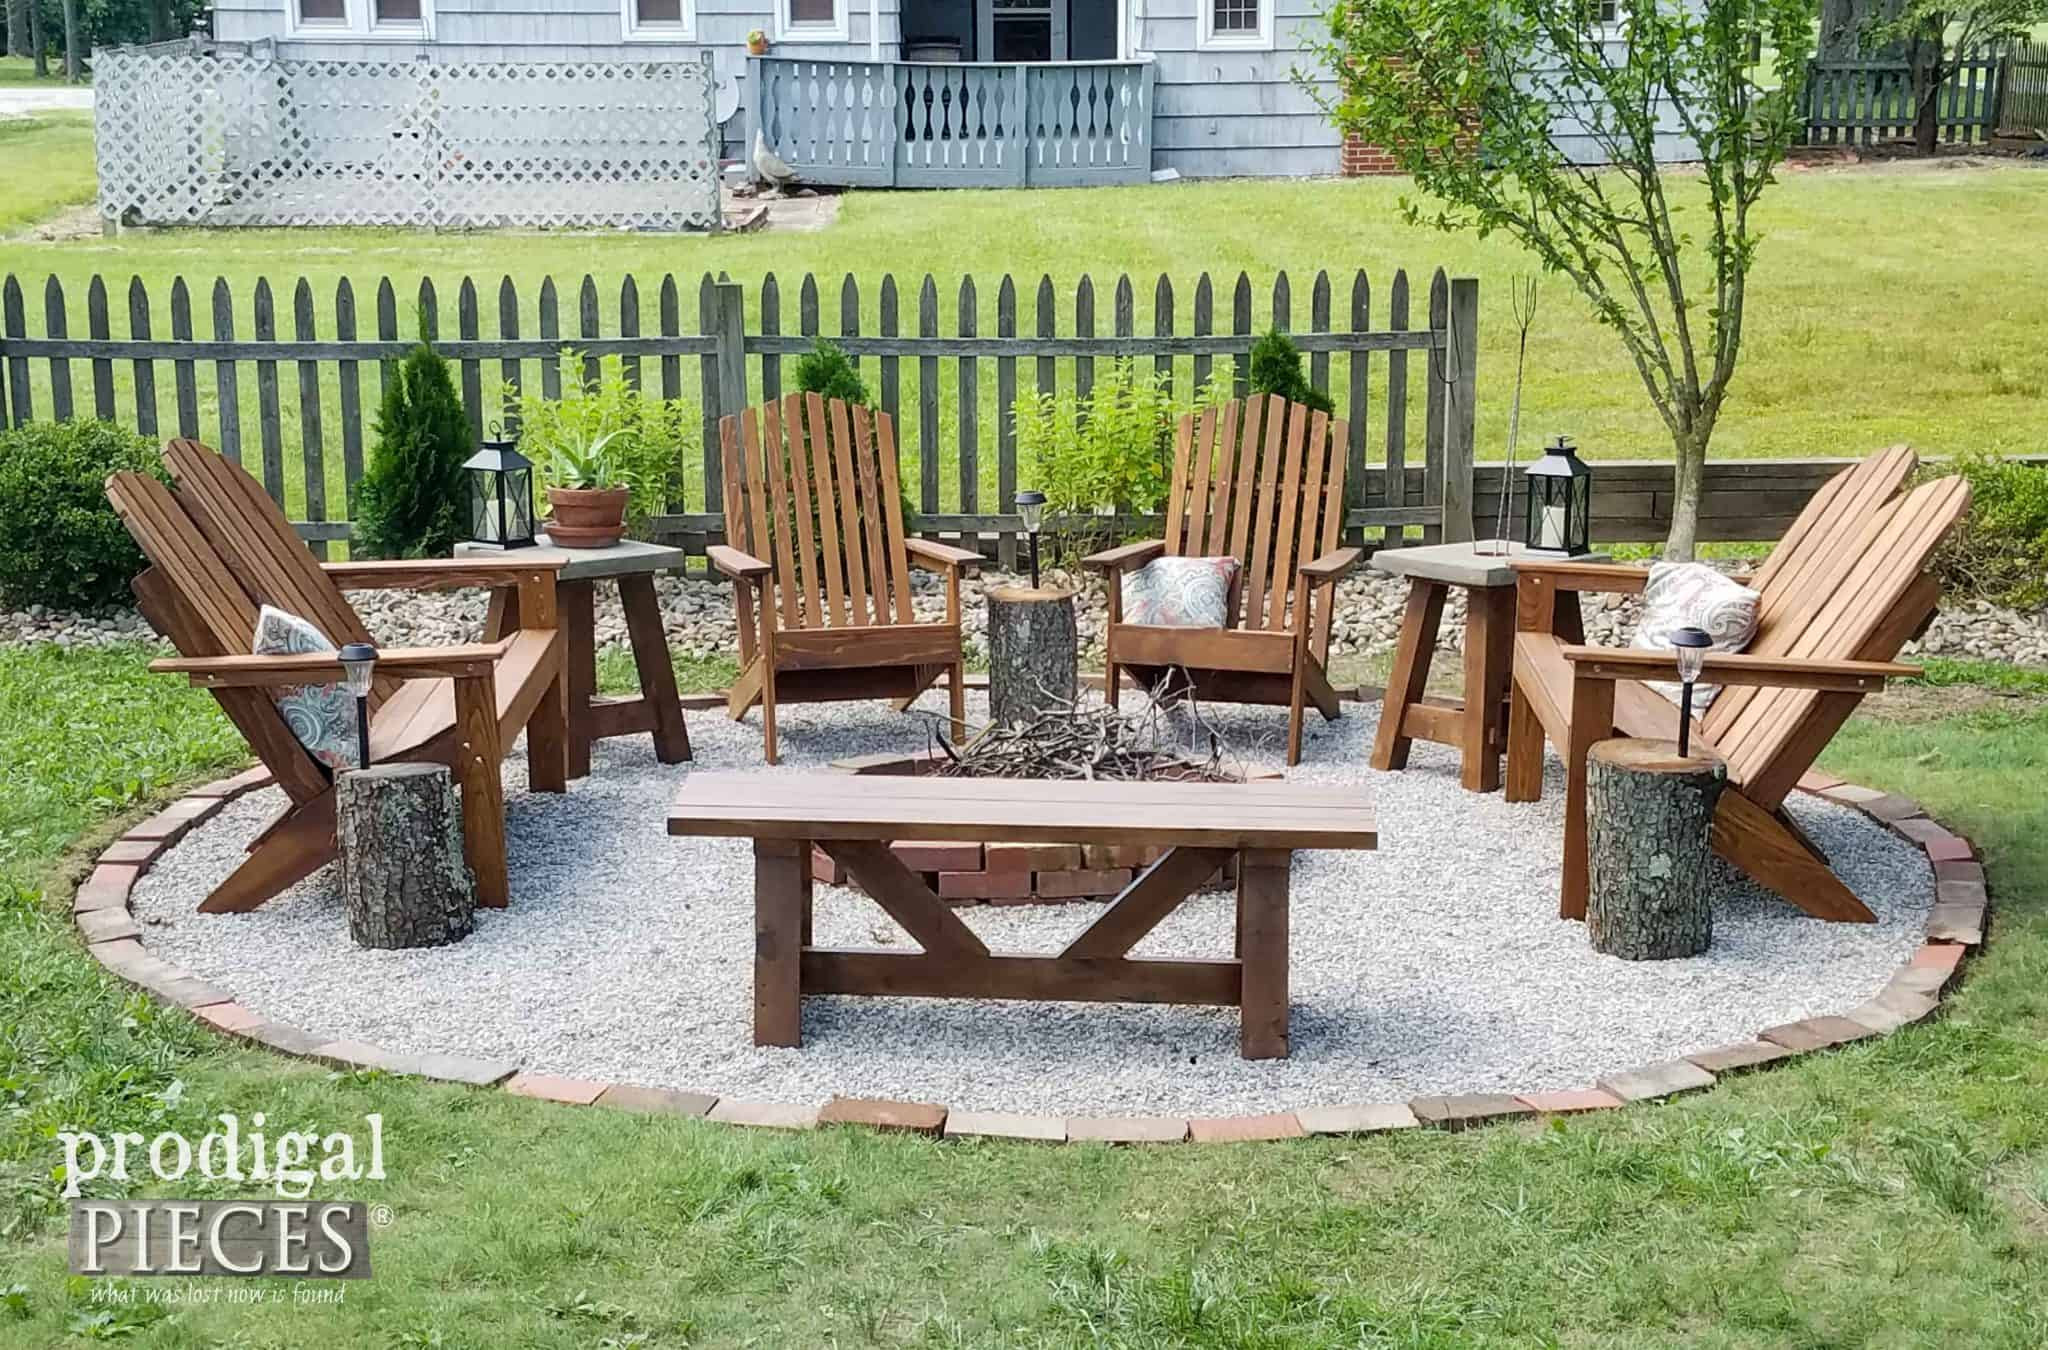 Building A Backyard Firepit
 Check Out These 12 DIY Fire Pits To Prepare For Summertime